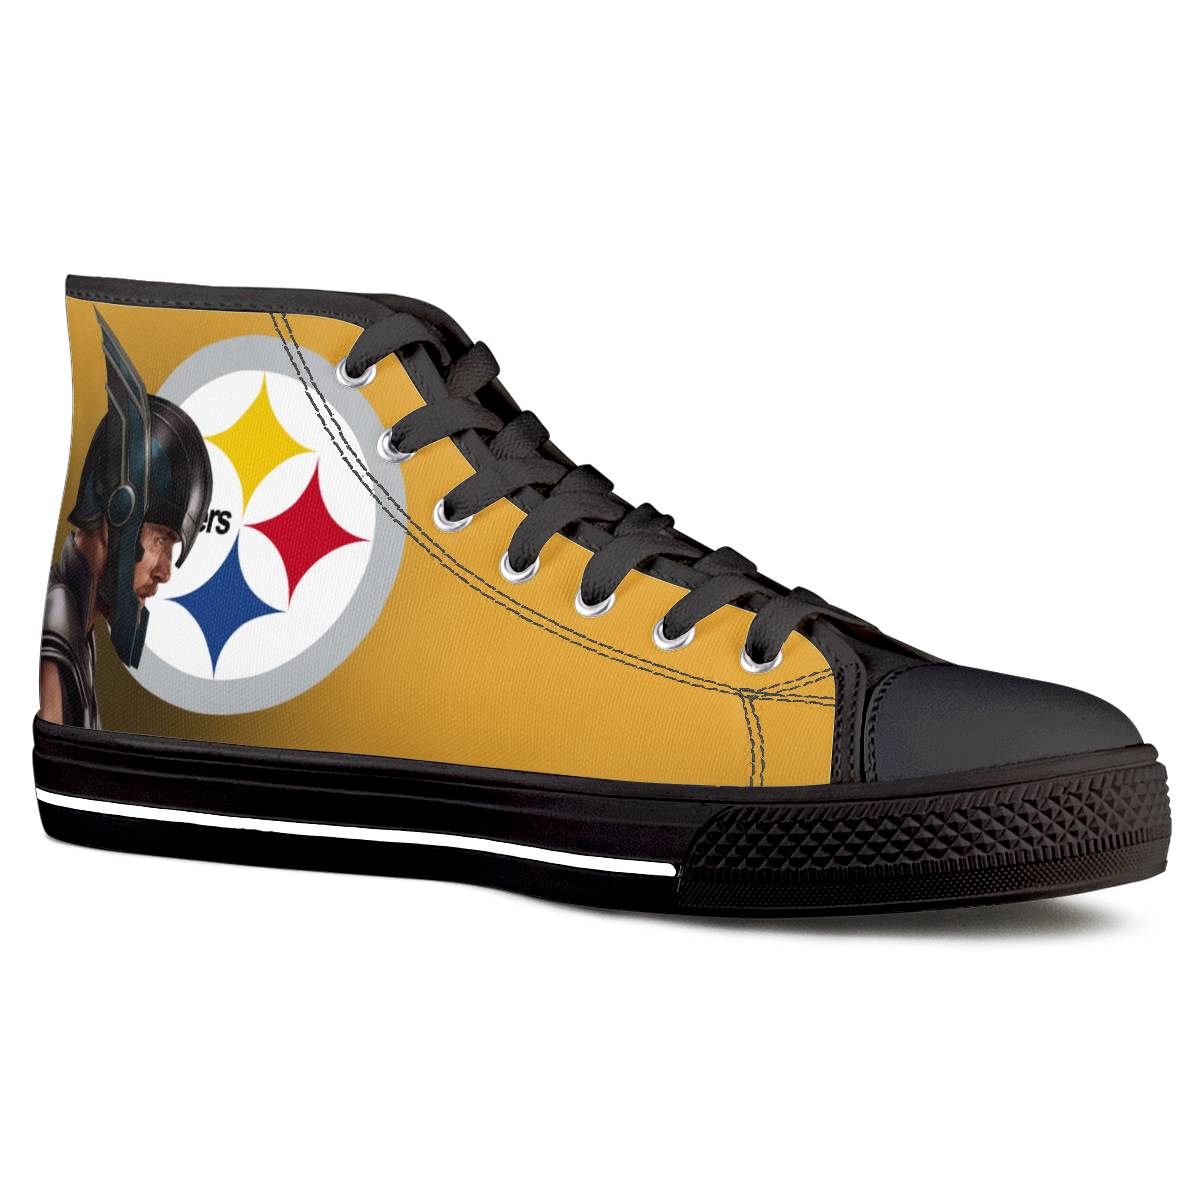 Women's Pittsburgh Steelers High Top Canvas Sneakers 007